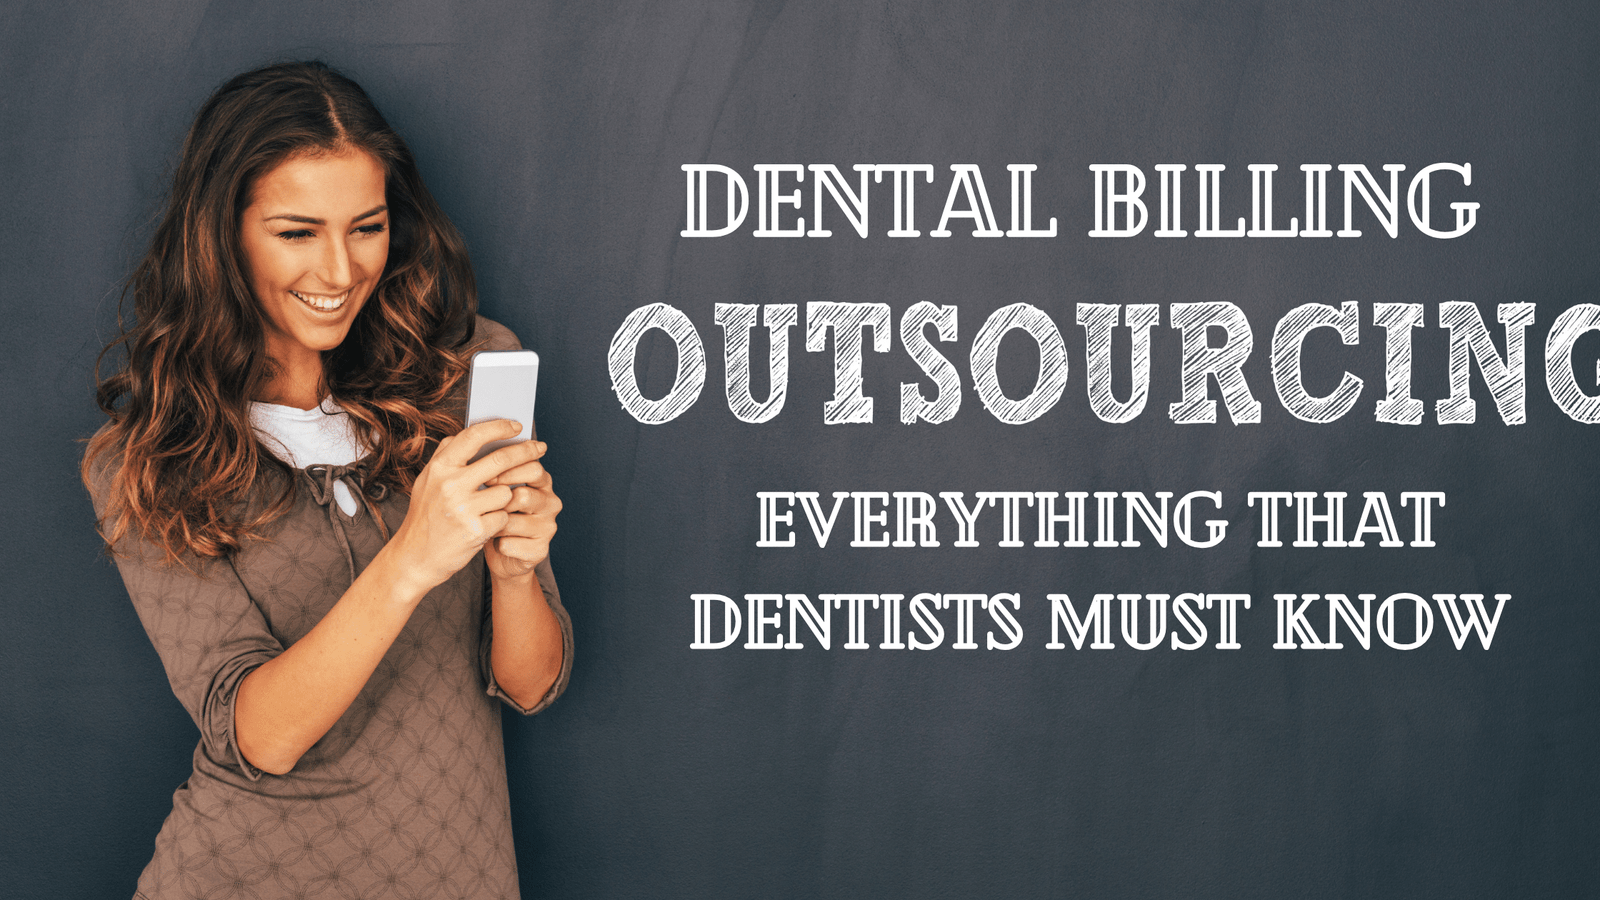 Dental Billing Outsourcing: Everything That Dentists Must Know